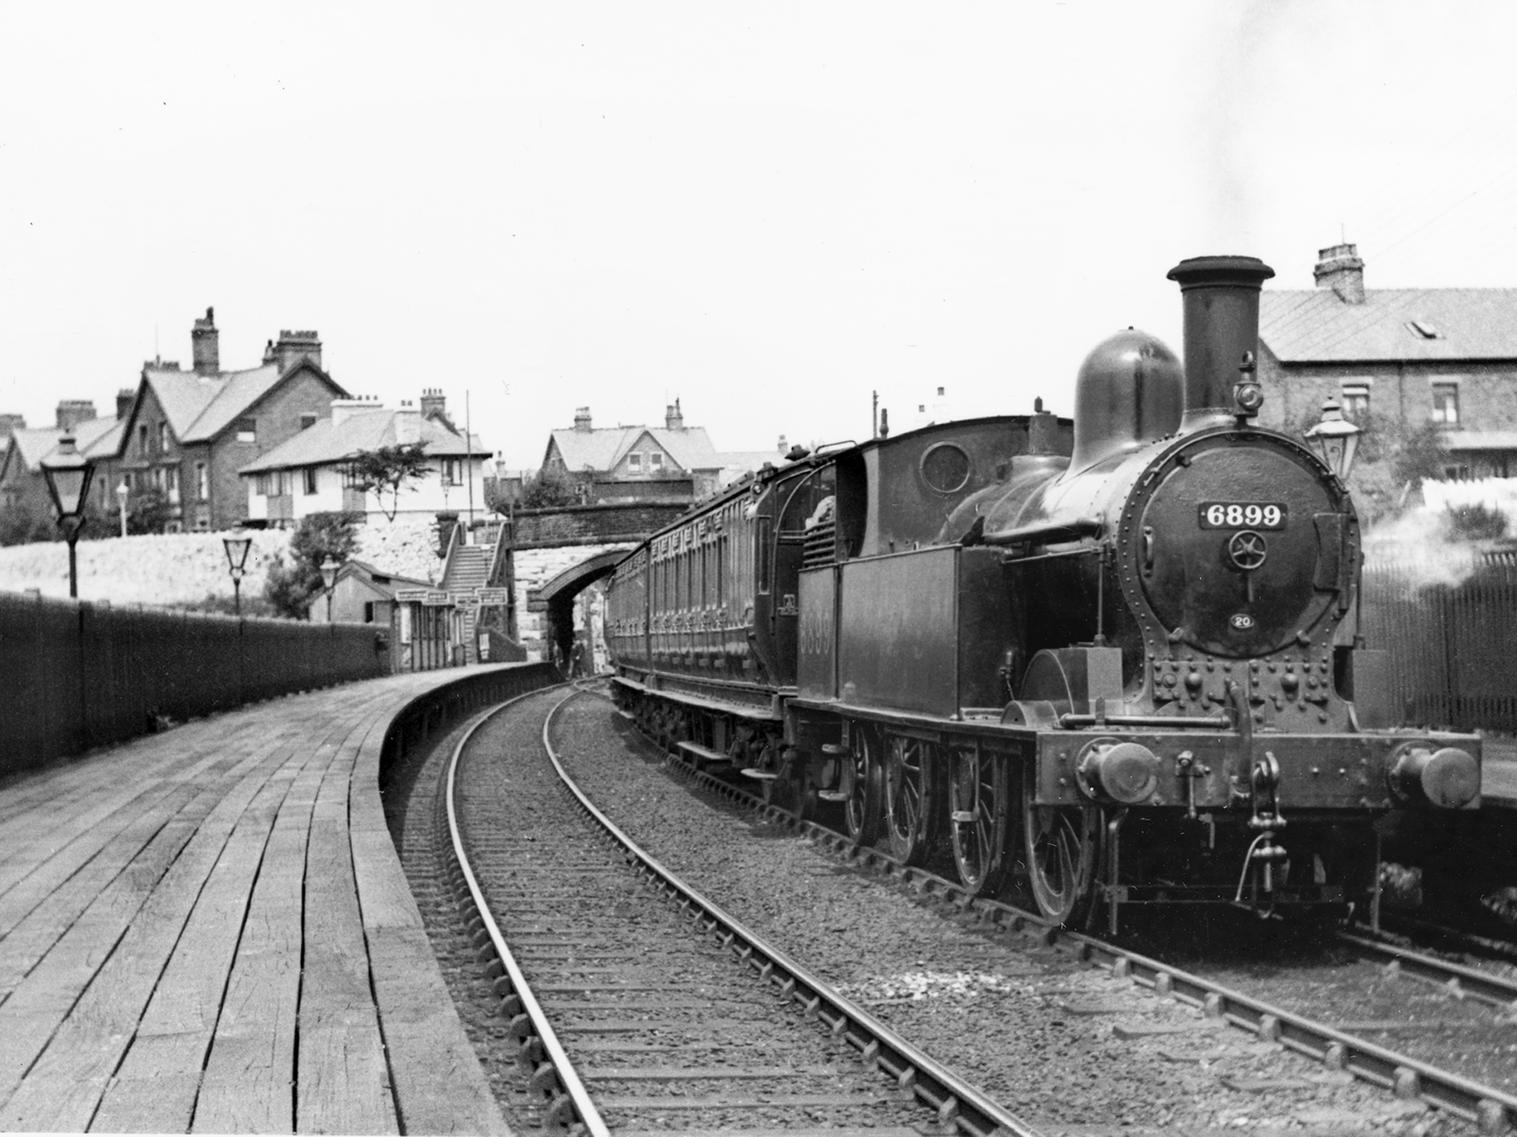 Higher Buxton station, June 1930